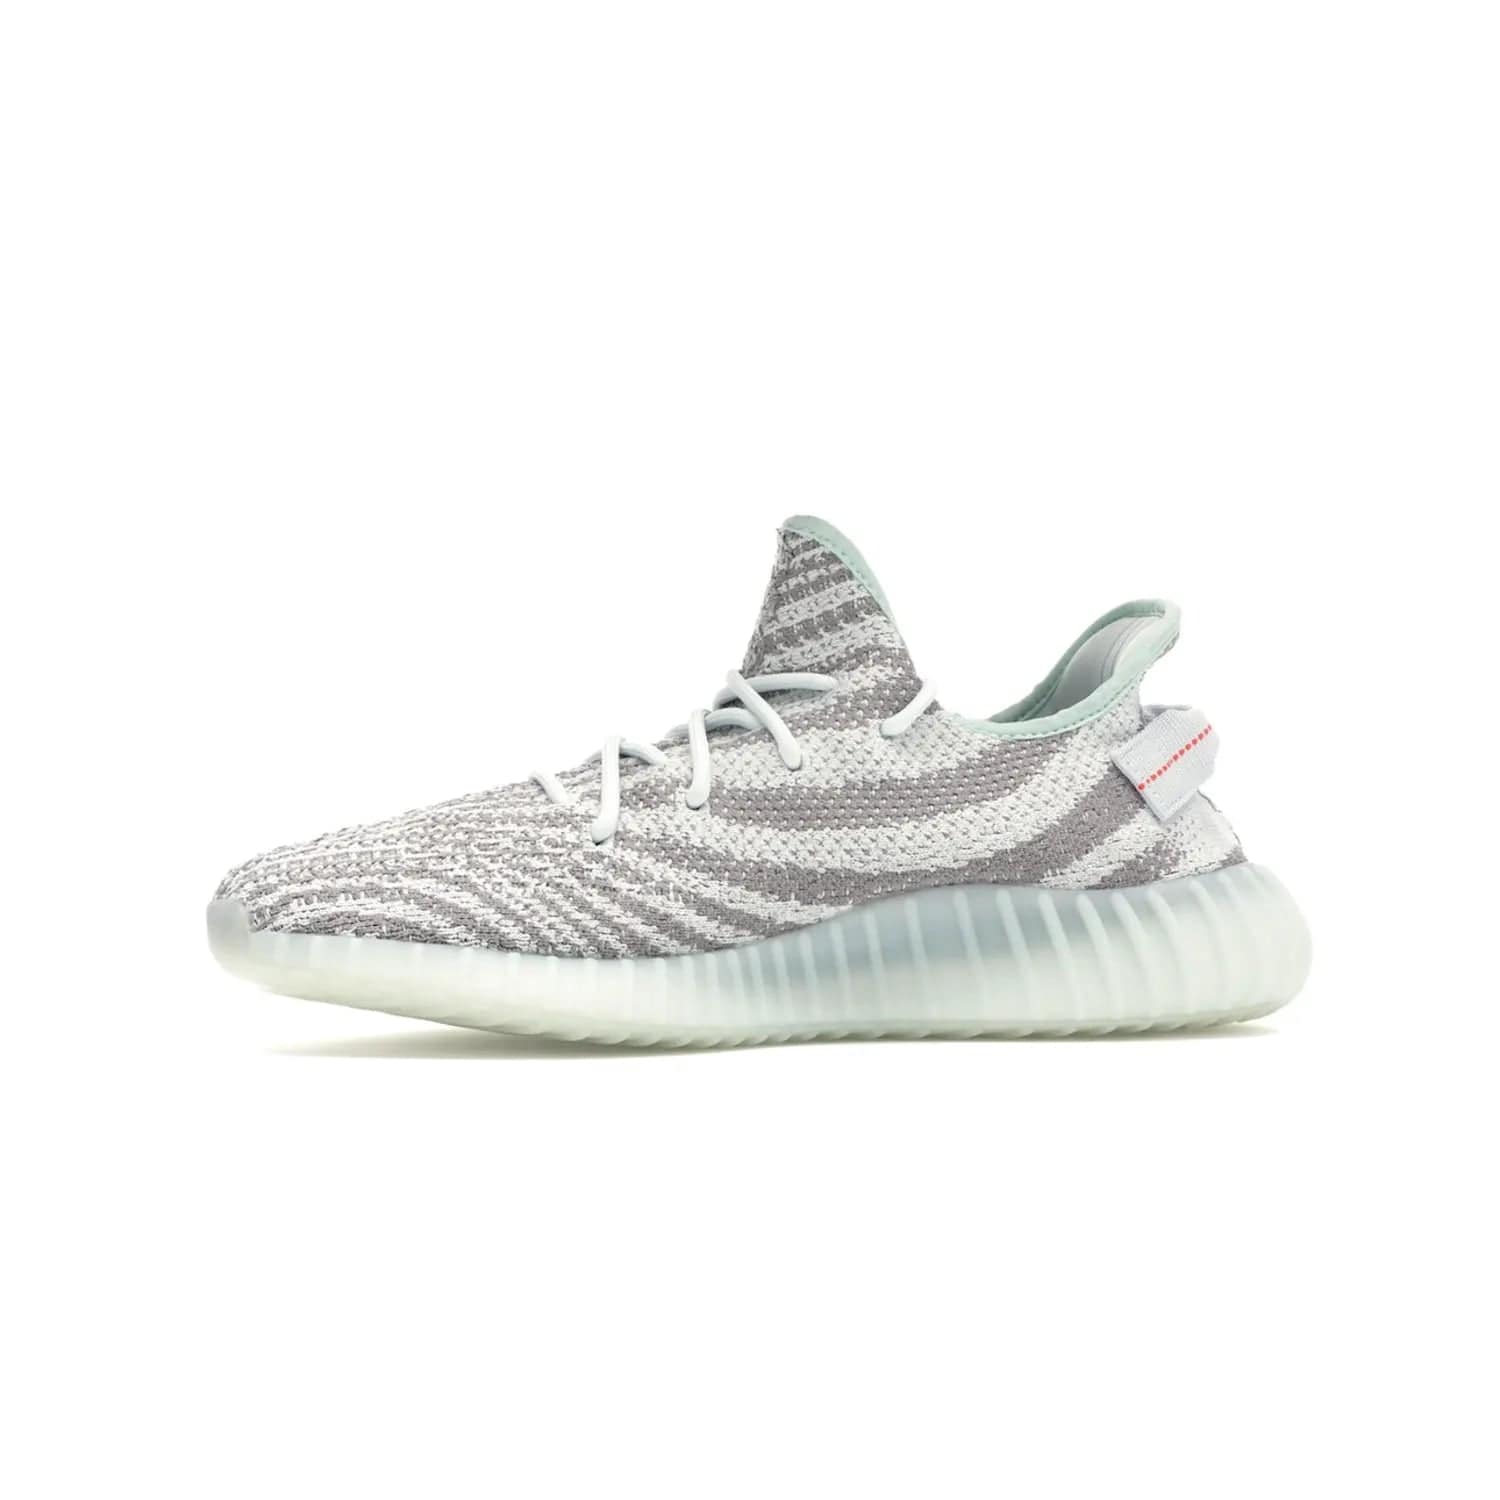 adidas Yeezy Boost 350 V2 Blue Tint - Image 18 - Only at www.BallersClubKickz.com - The adidas Yeezy Boost 350 V2 Blue Tint merges fashion and functionality with its Primeknit upper and Boost sole. Released in December 2017, this luxurious sneaker is perfect for making a stylish statement.